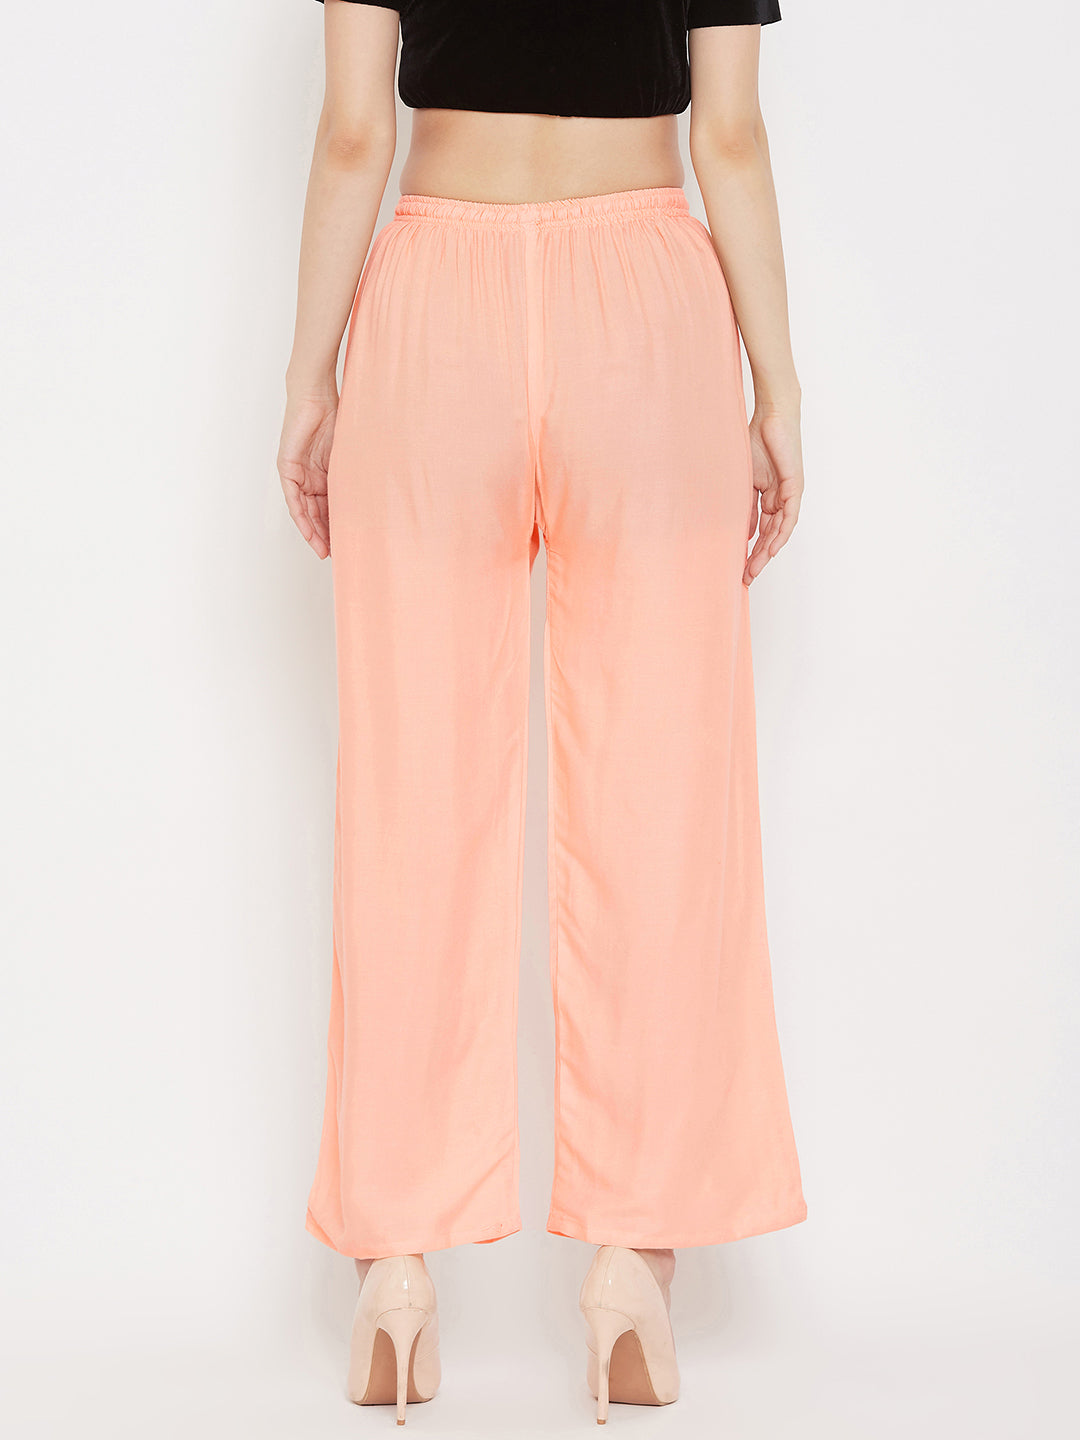 In Strides Pants - Dusty Peach - West of Fifty Five